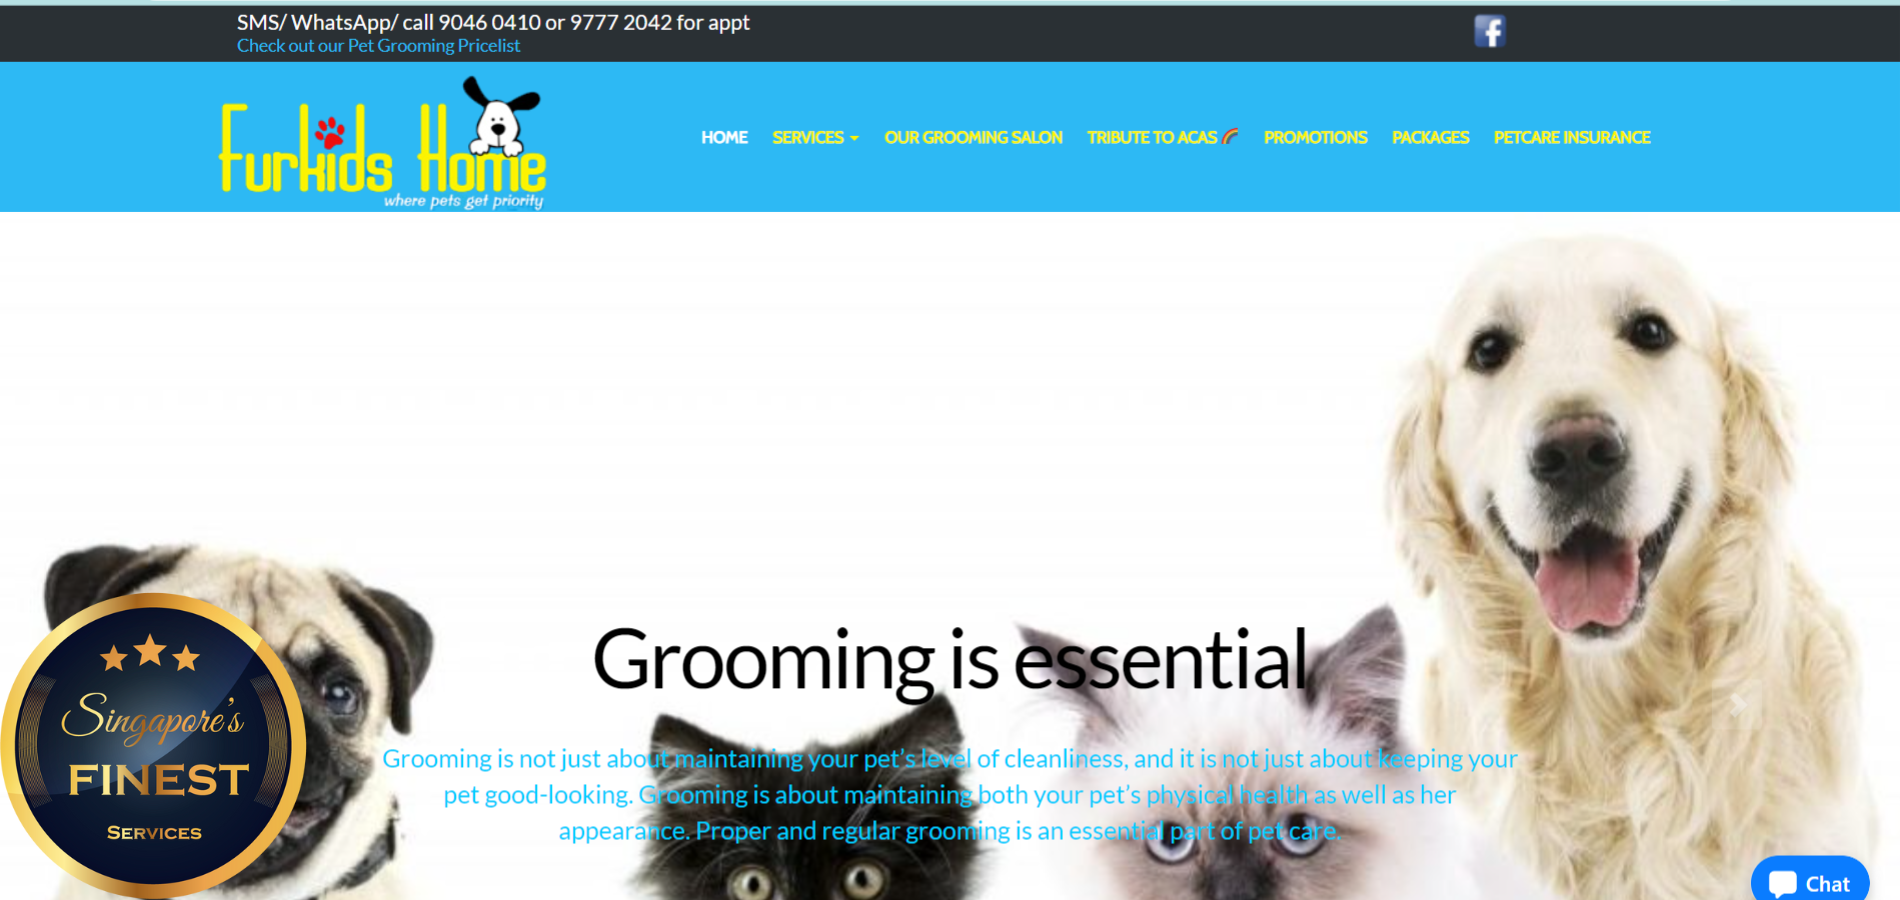 The Finest Pet Grooming Salons in Singapore